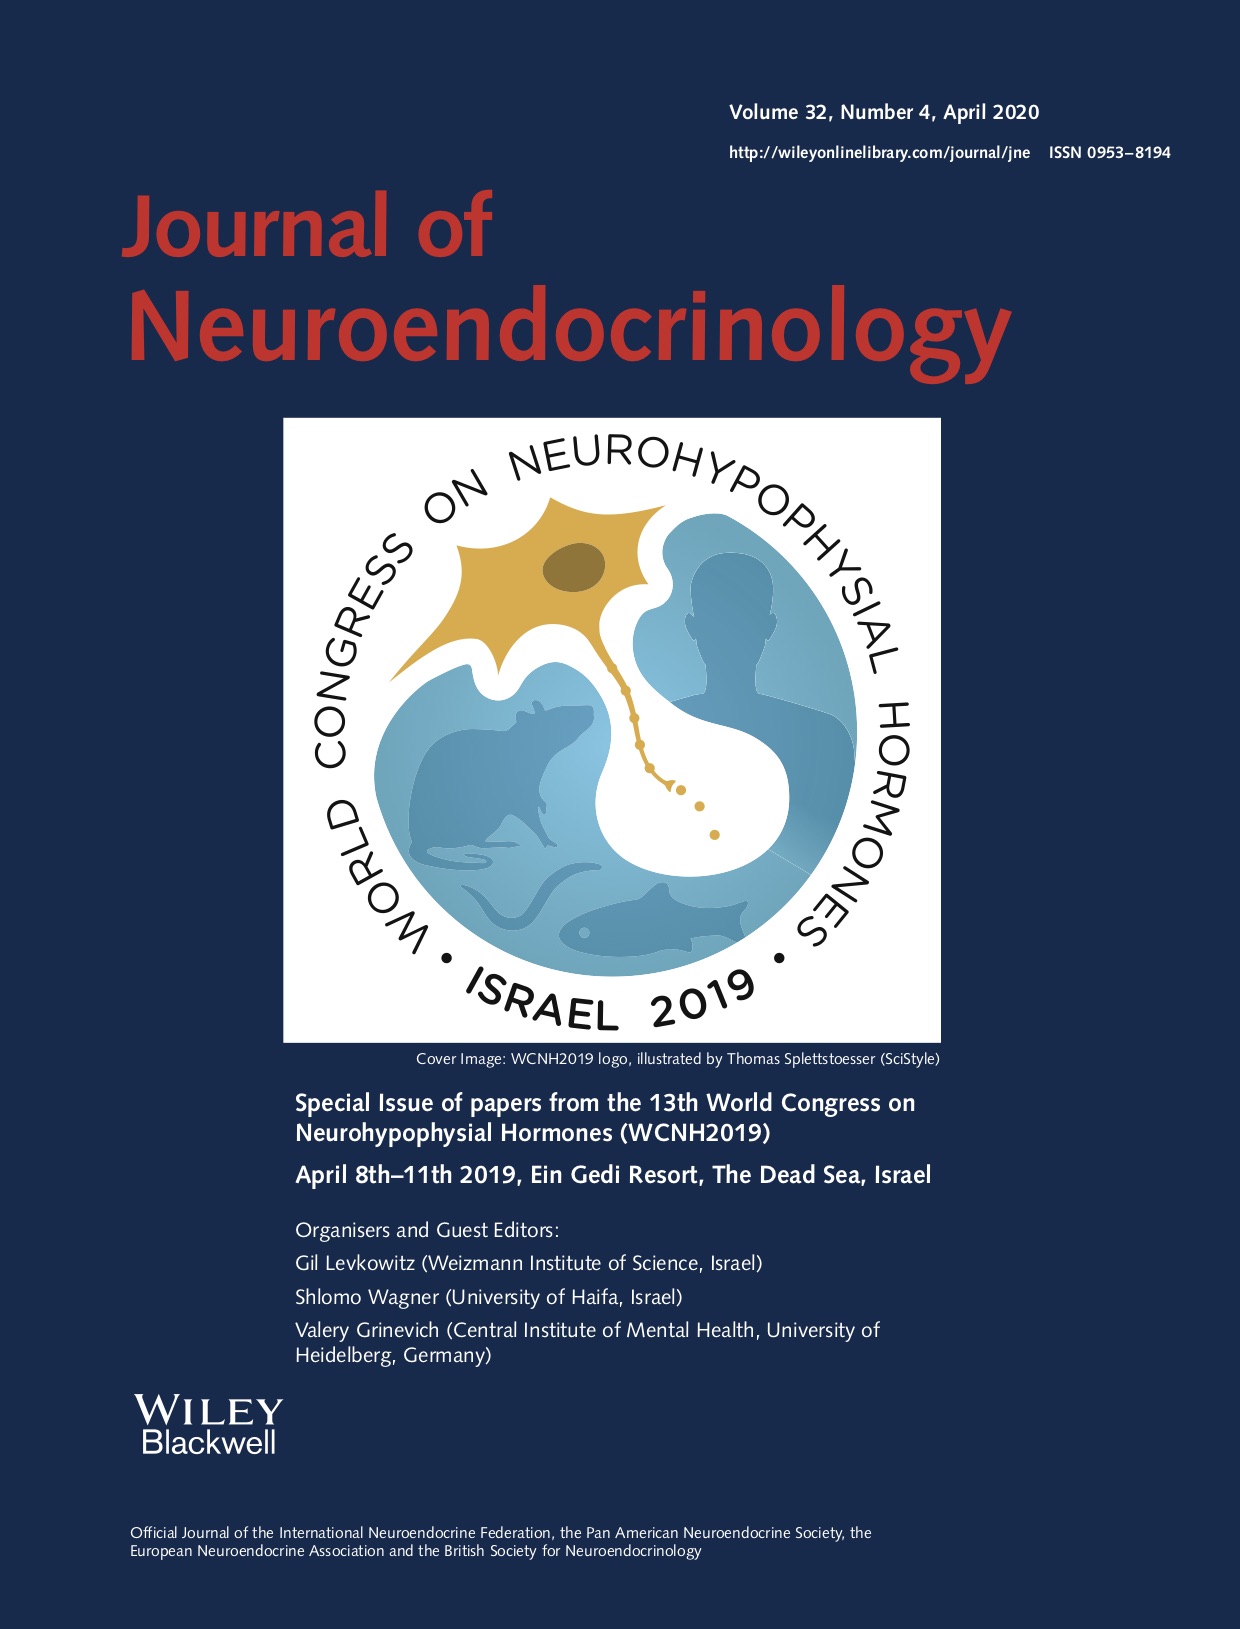 Special Issue: 13th World Congress on Neurohypophysial Hormones Edited by  Gil Levkowitz Shlomo Wagner Valery Grinevich.